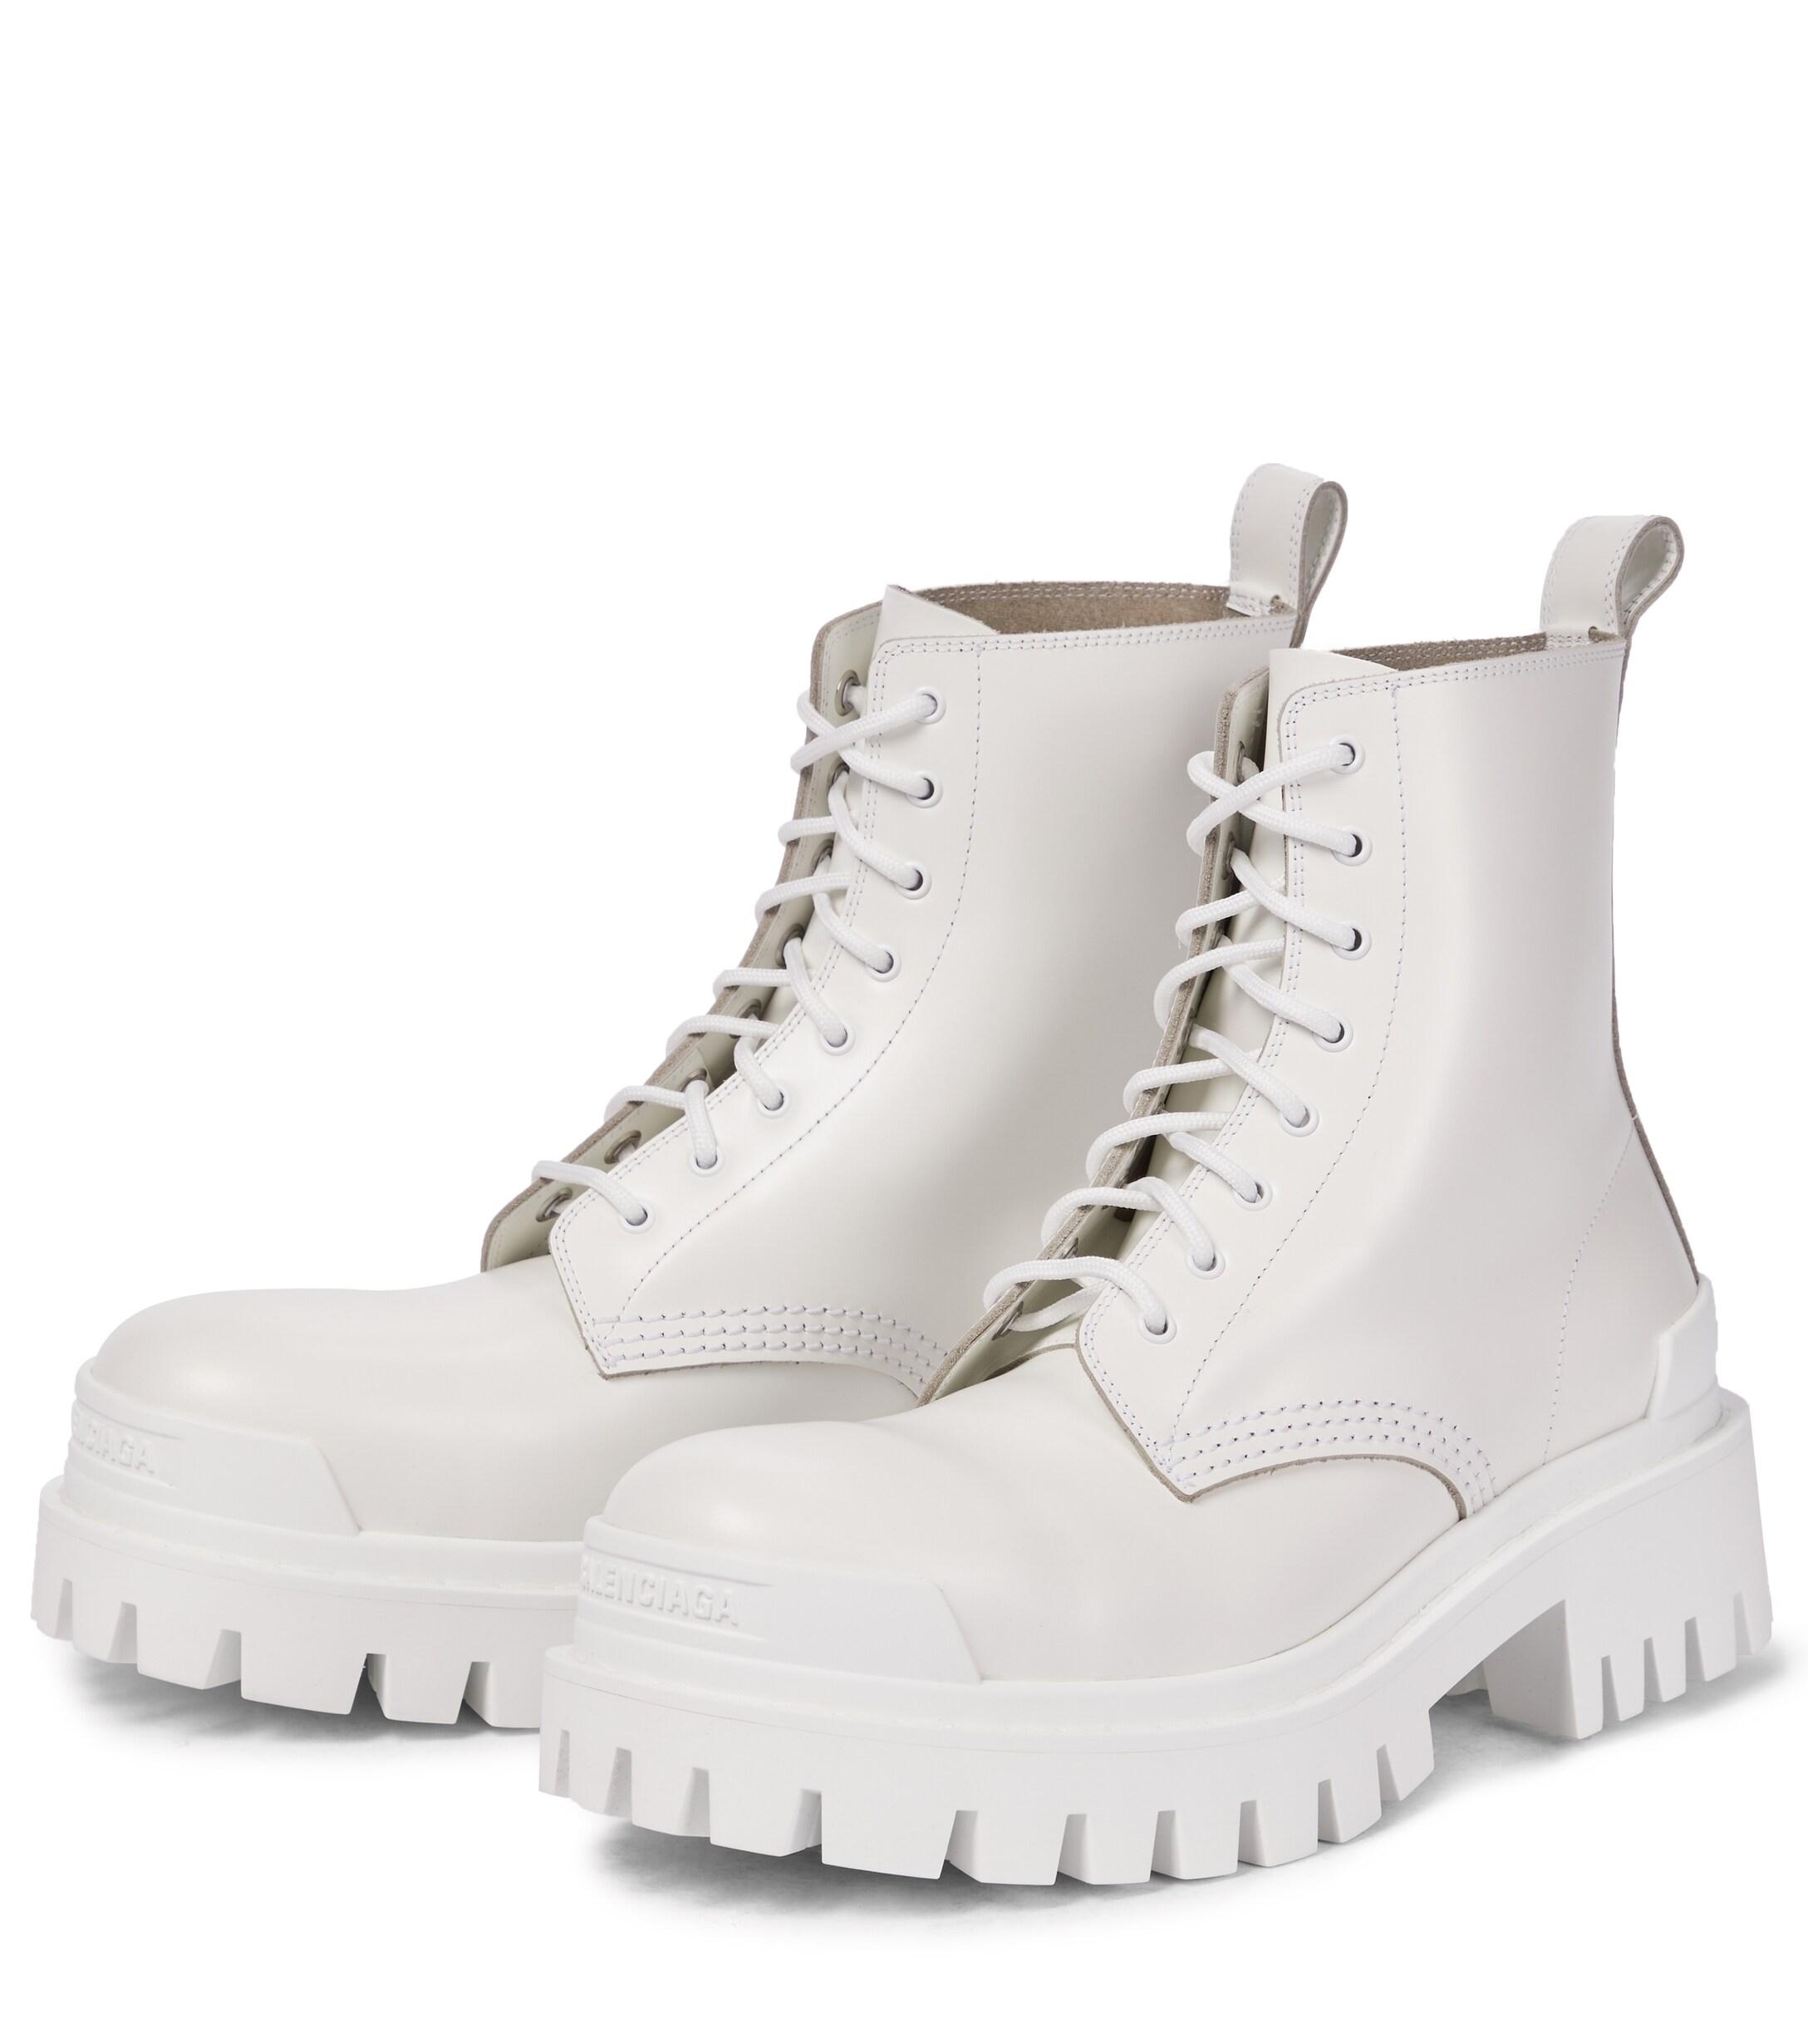 Balenciaga Strike Leather Combat Boots in White | Lyst